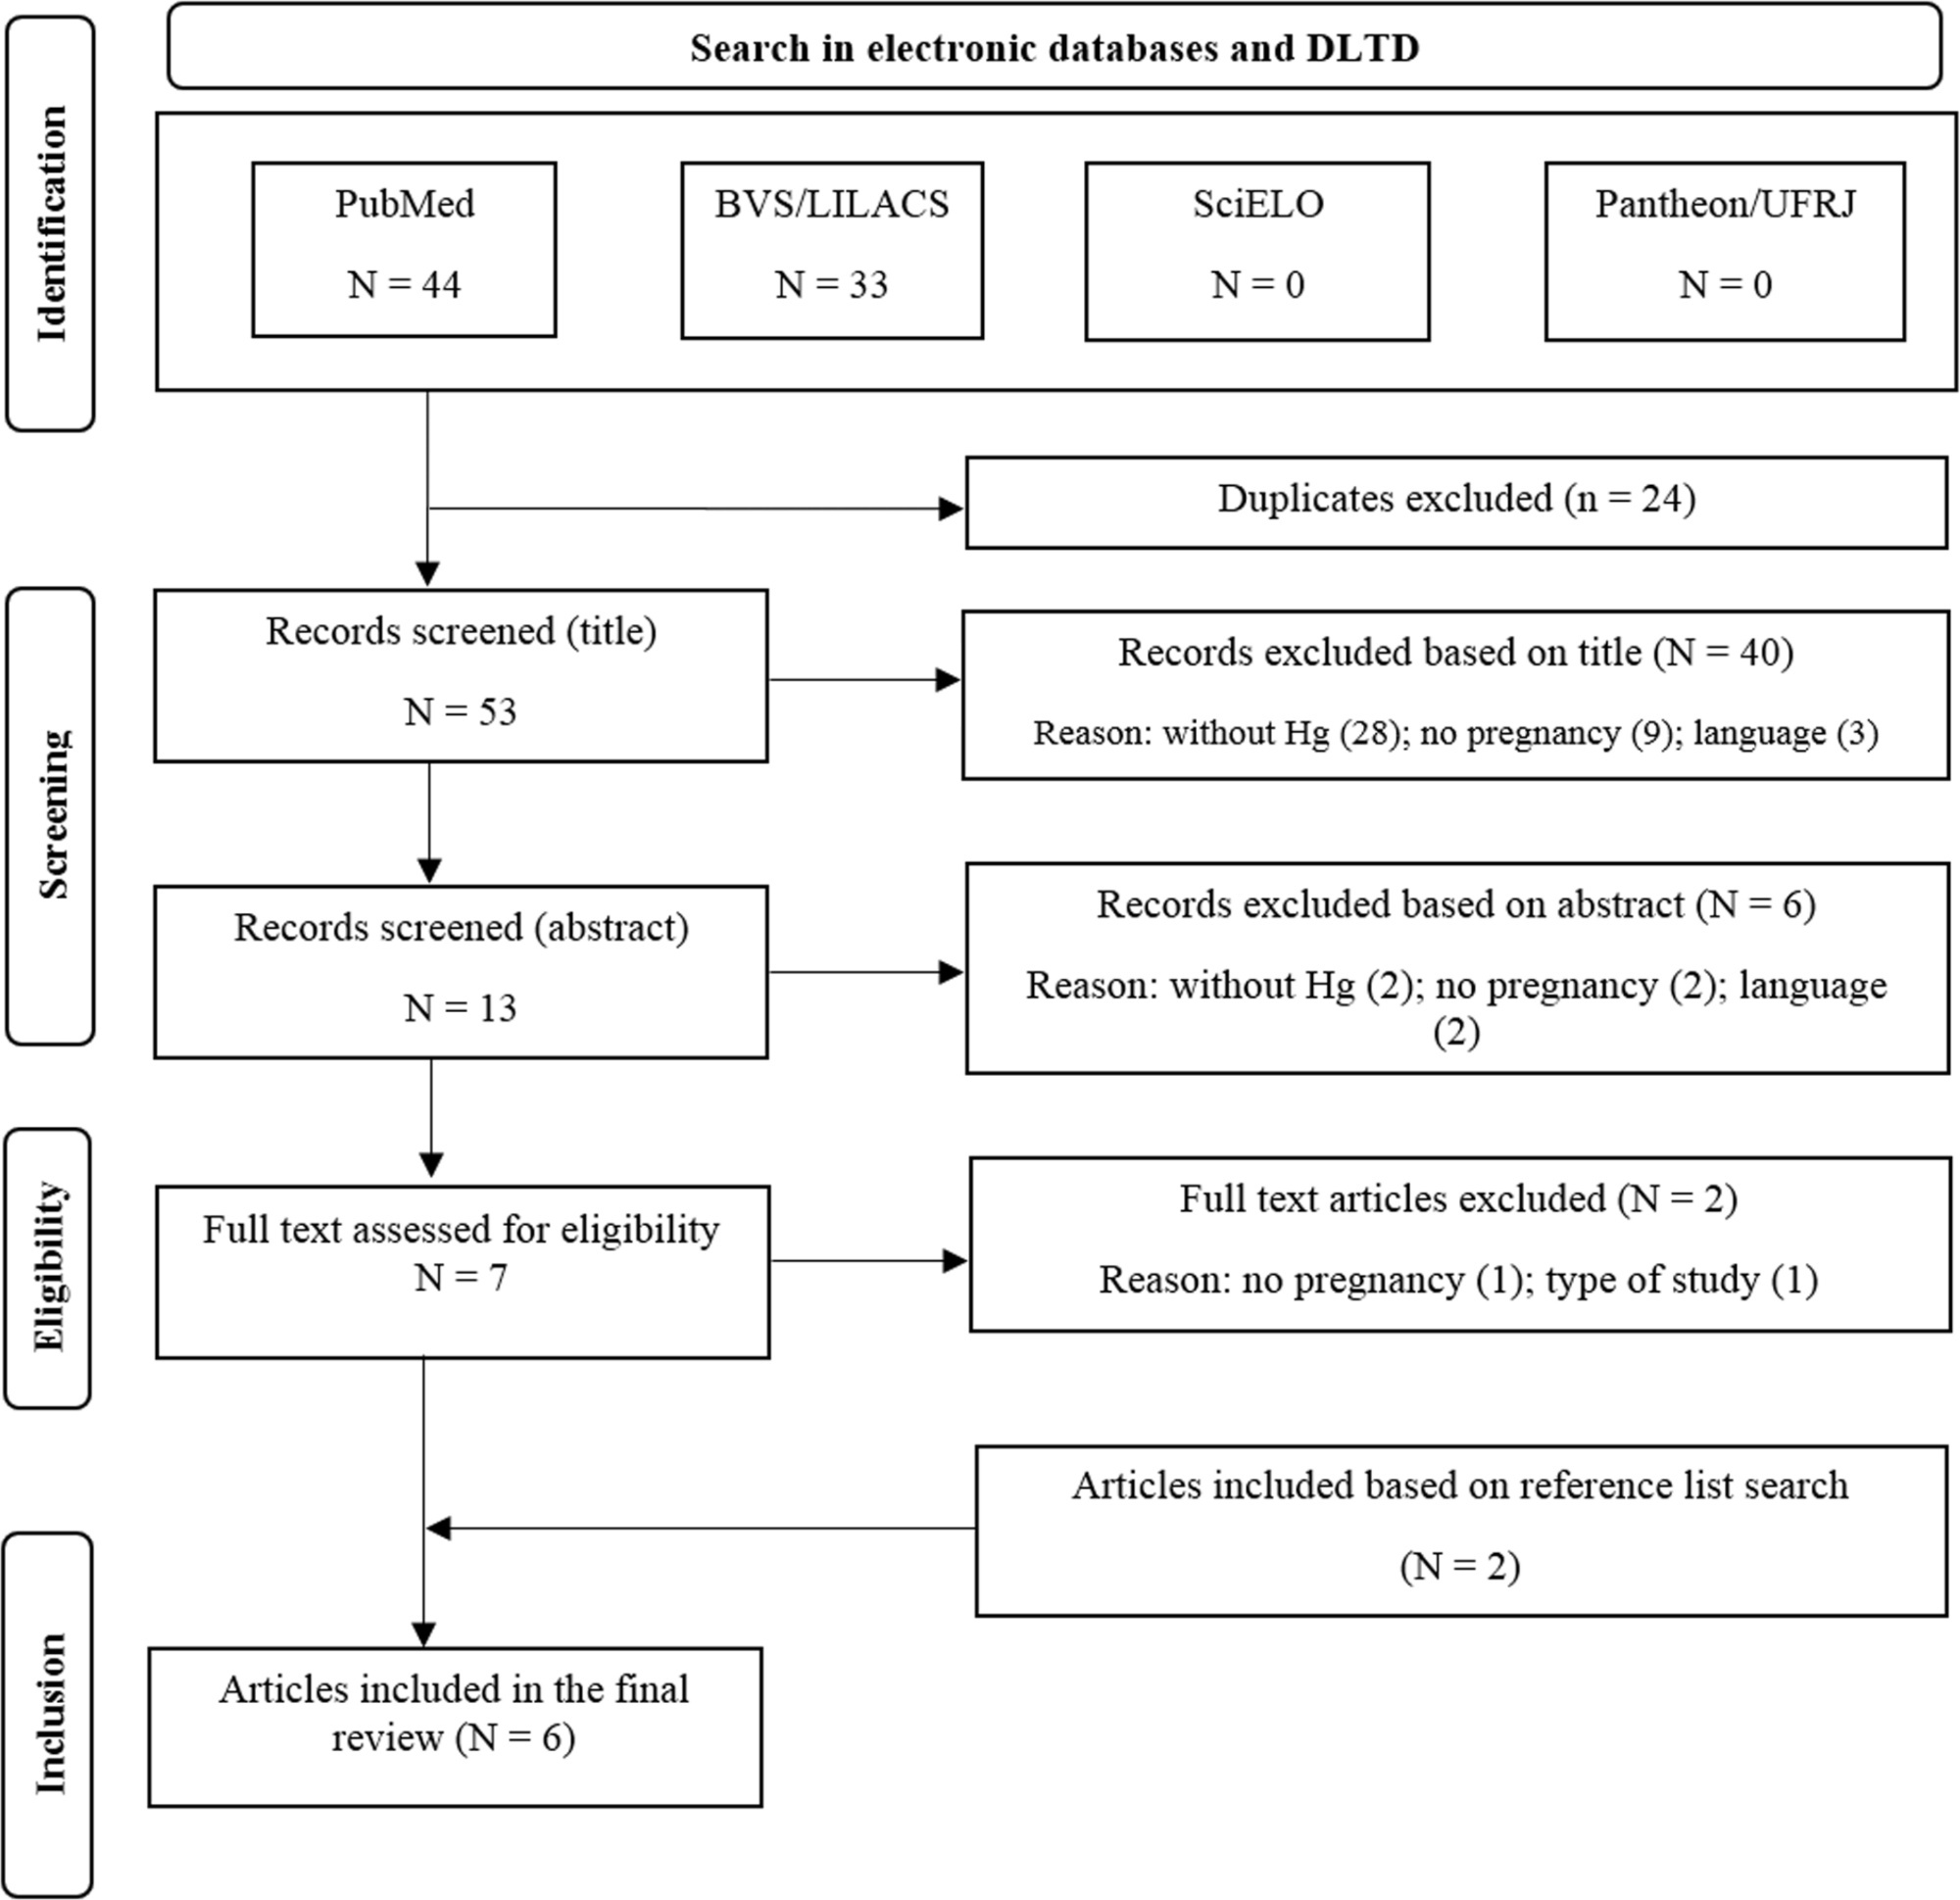 Maternal Mercury Exposure and Hypertensive Disorders of Pregnancy: A Systematic Review